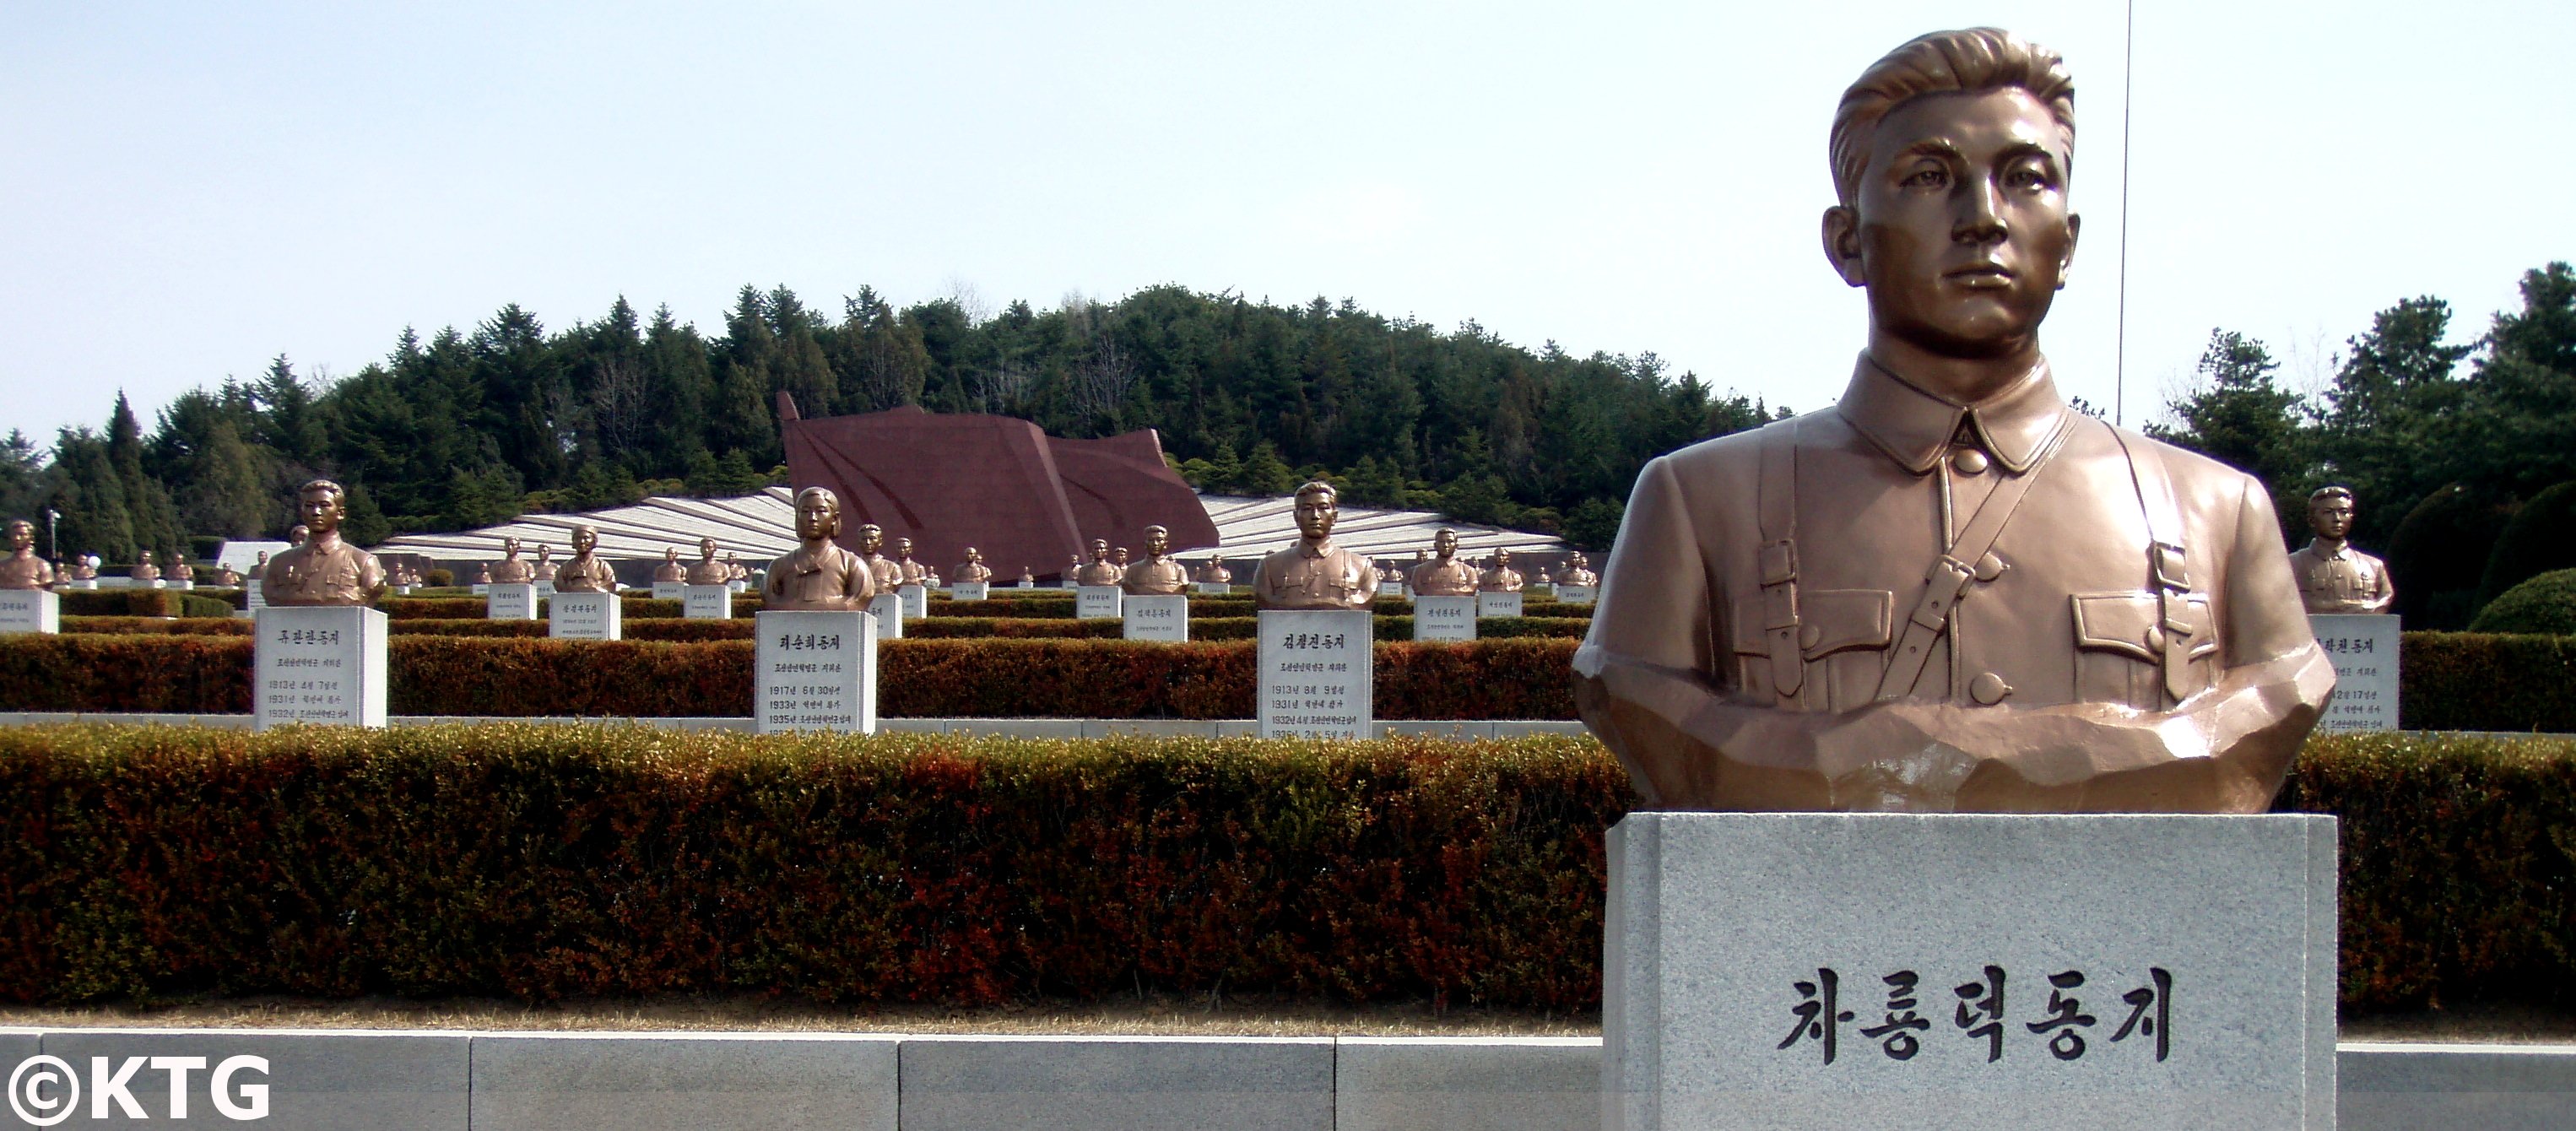 Revolutionary Martyr's Cemetery in the outskirts of Pyongyang, capital of North Korea